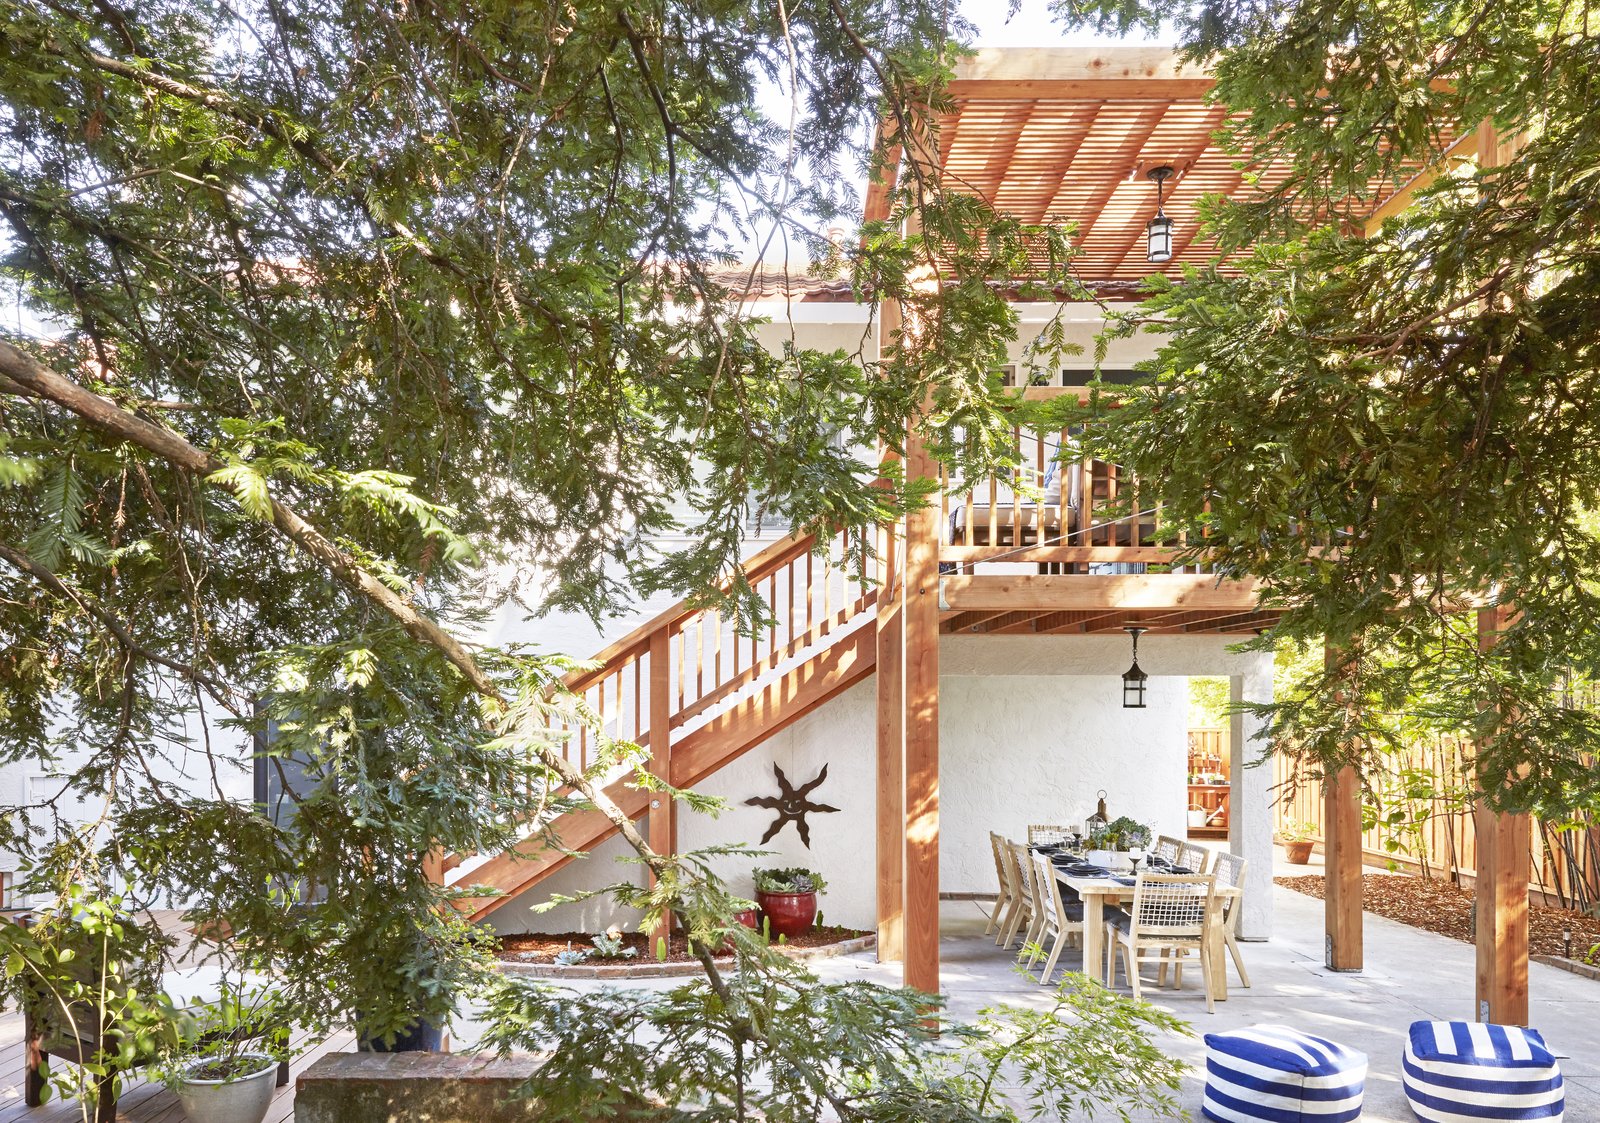 An Elegant Redwood Deck Transforms the Exterior of a ‘70s Home